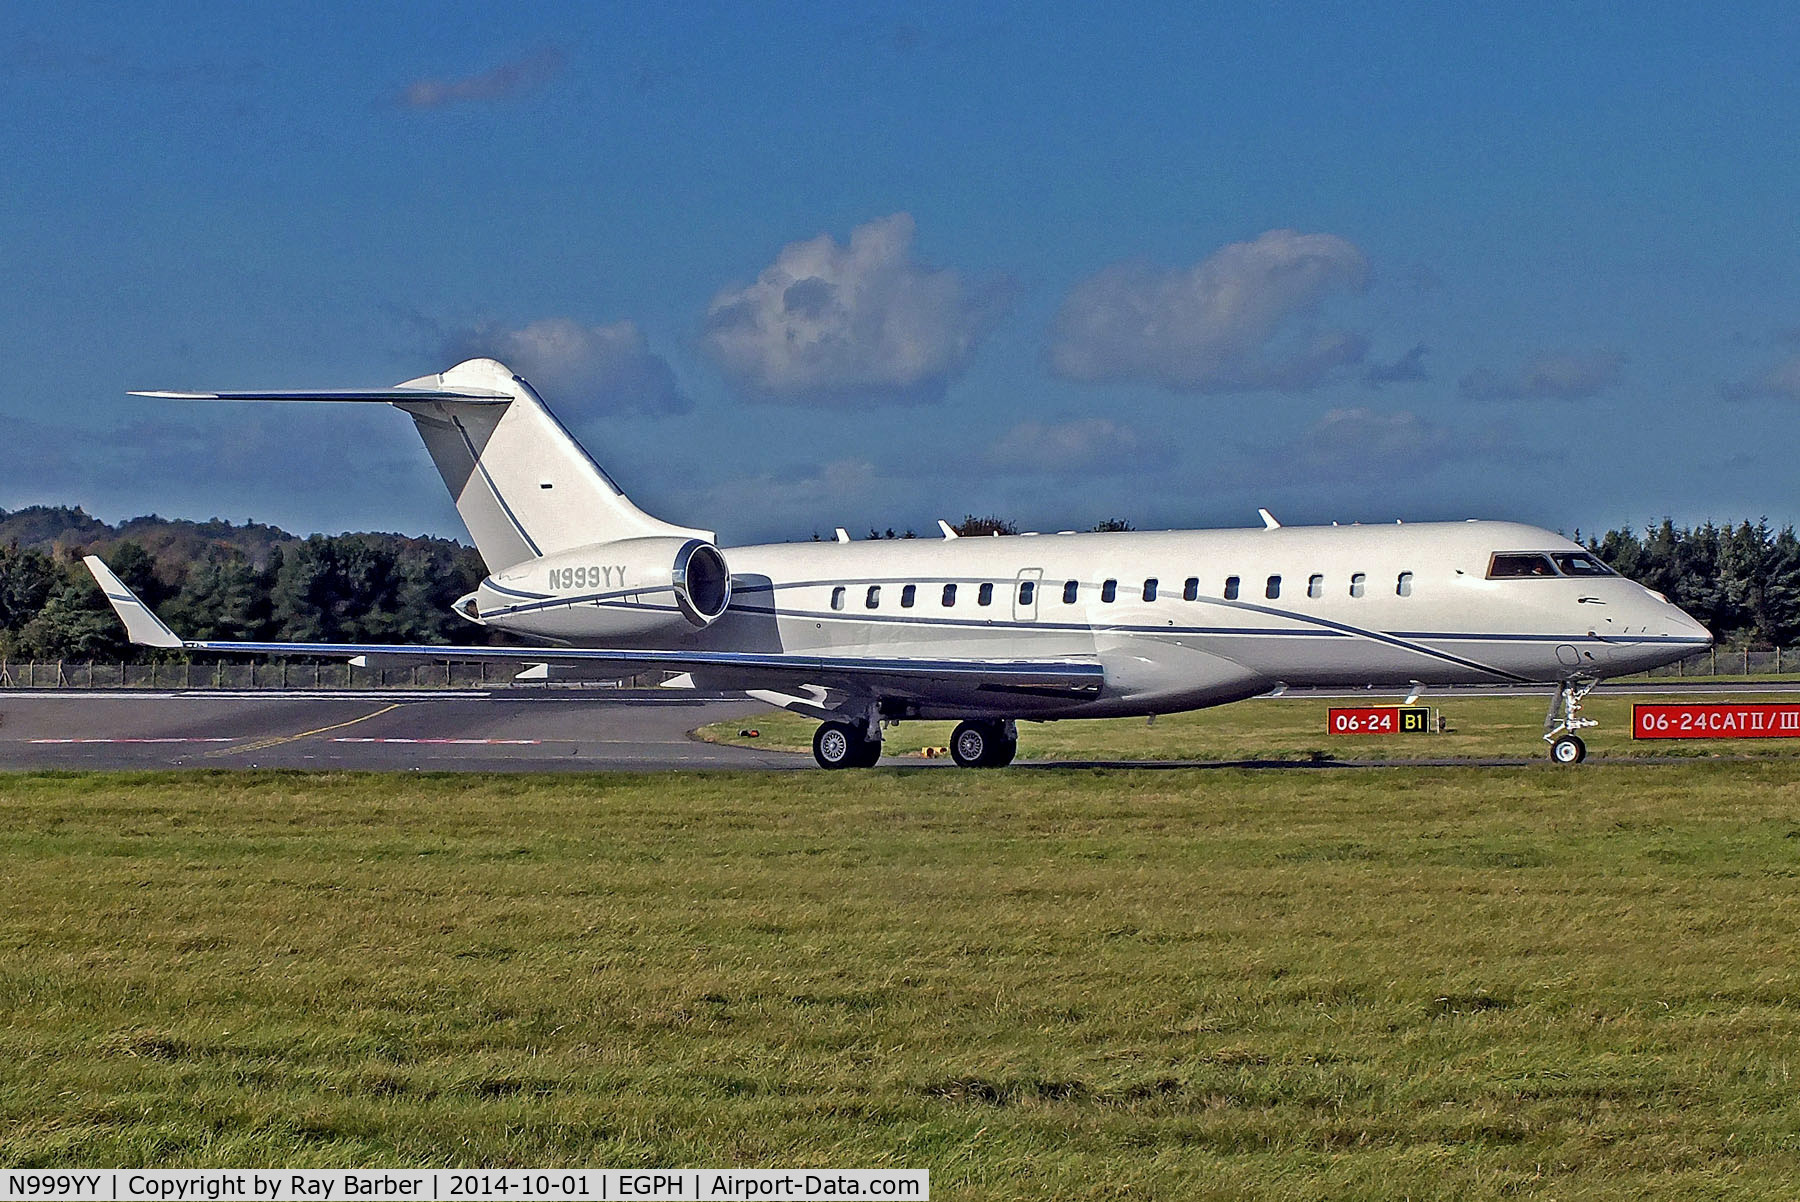 Aircraft N999YY (2007 Bombardier BD-700-1A10 Global Express C\/N 9240) Photo by Ray Barber (Photo ...